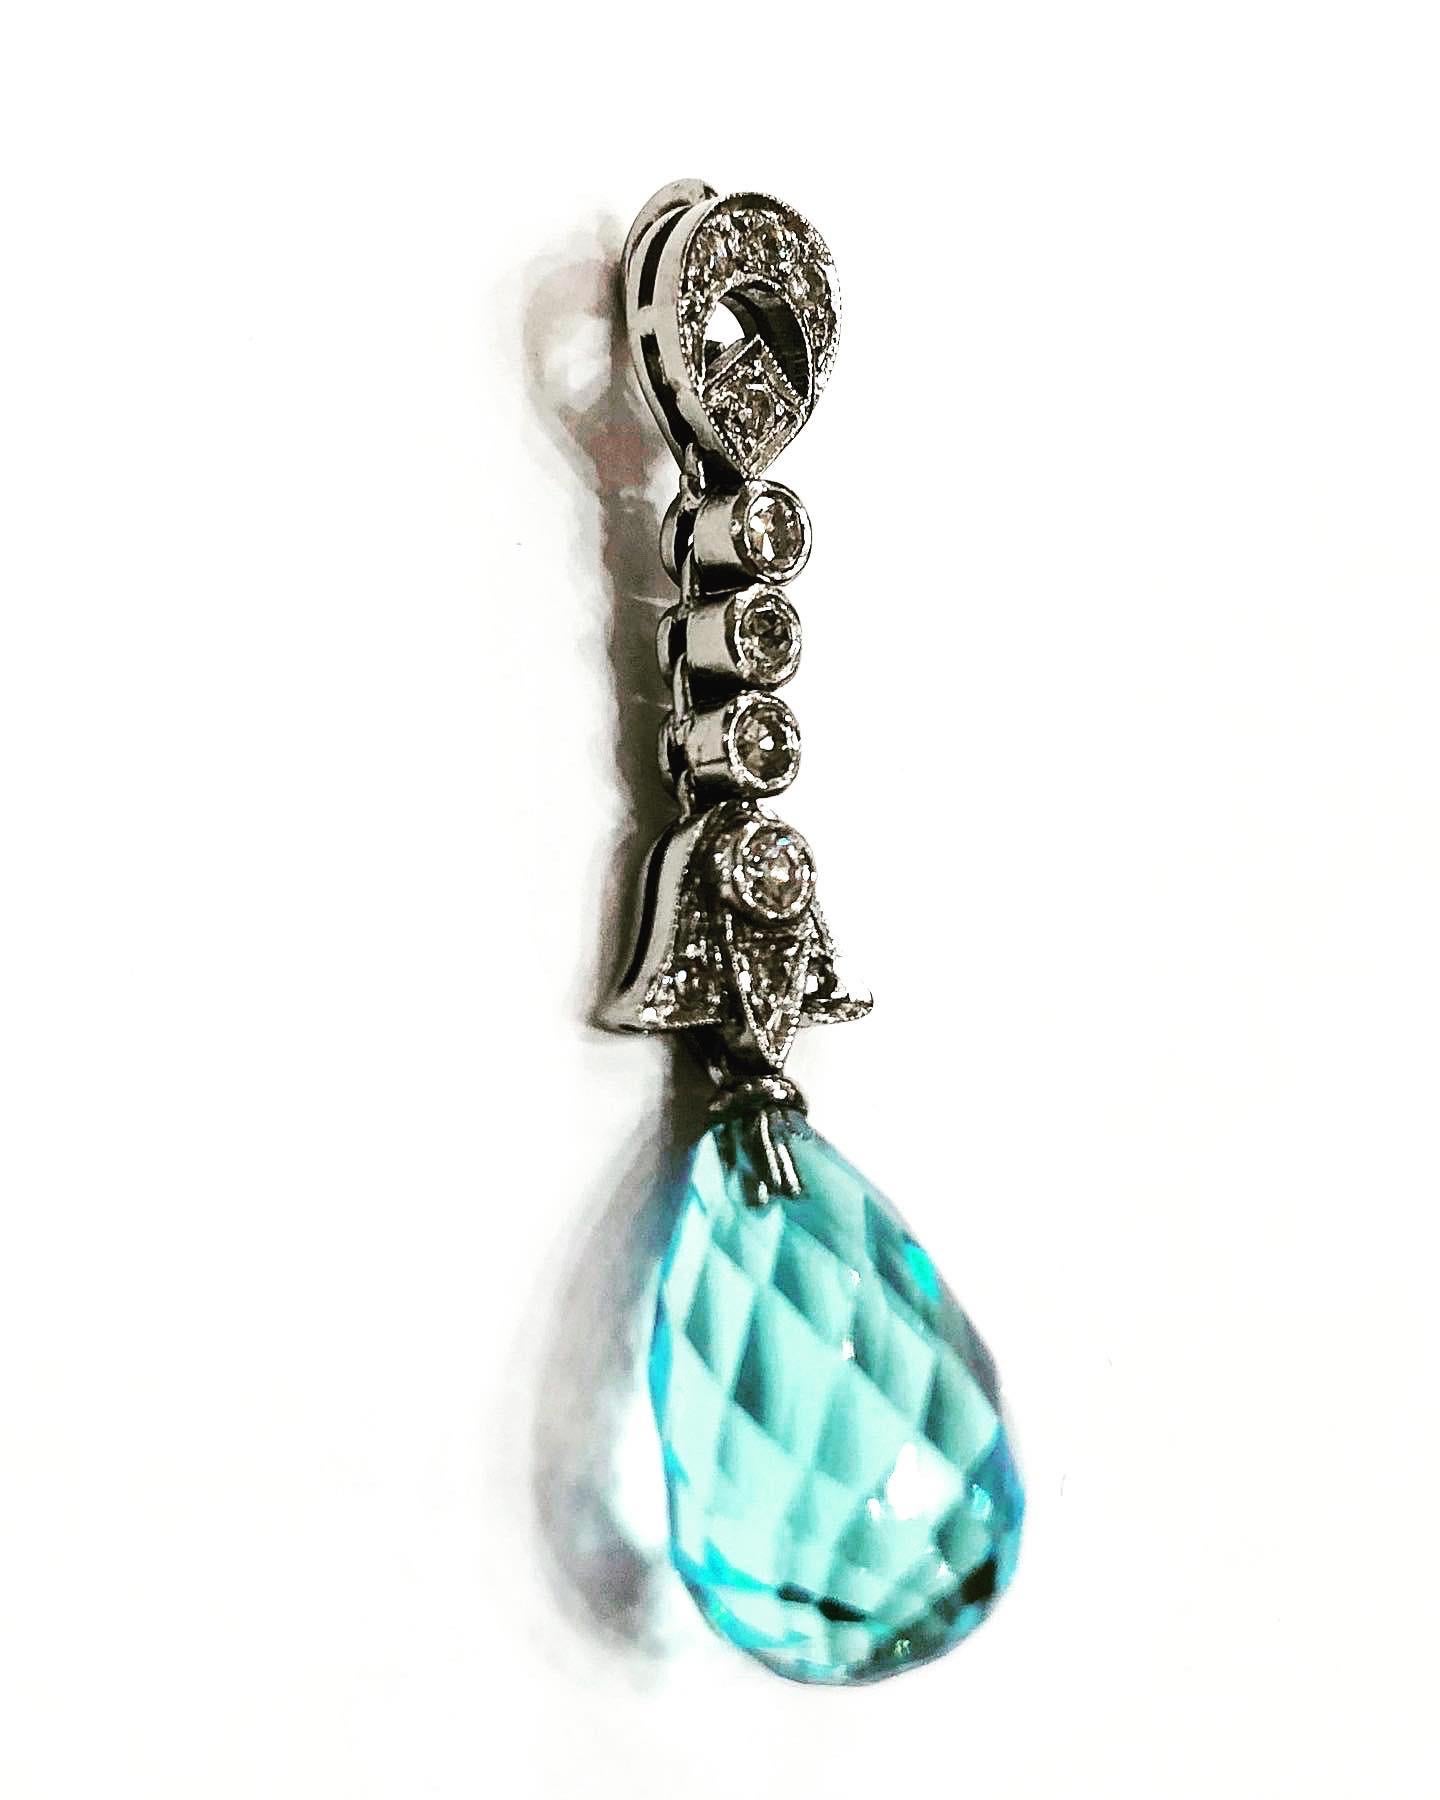 Stylish 1920's Art Deco Briolette London Blue Topaz, Diamonds articulate Platinum Pendant.
Old European Diamond cut and briolette cut topaz.
Total approximate weight of the diamonds: 0.32 carat.
Lenght: 4.3 cm.
Weight of the pendant is 3.98